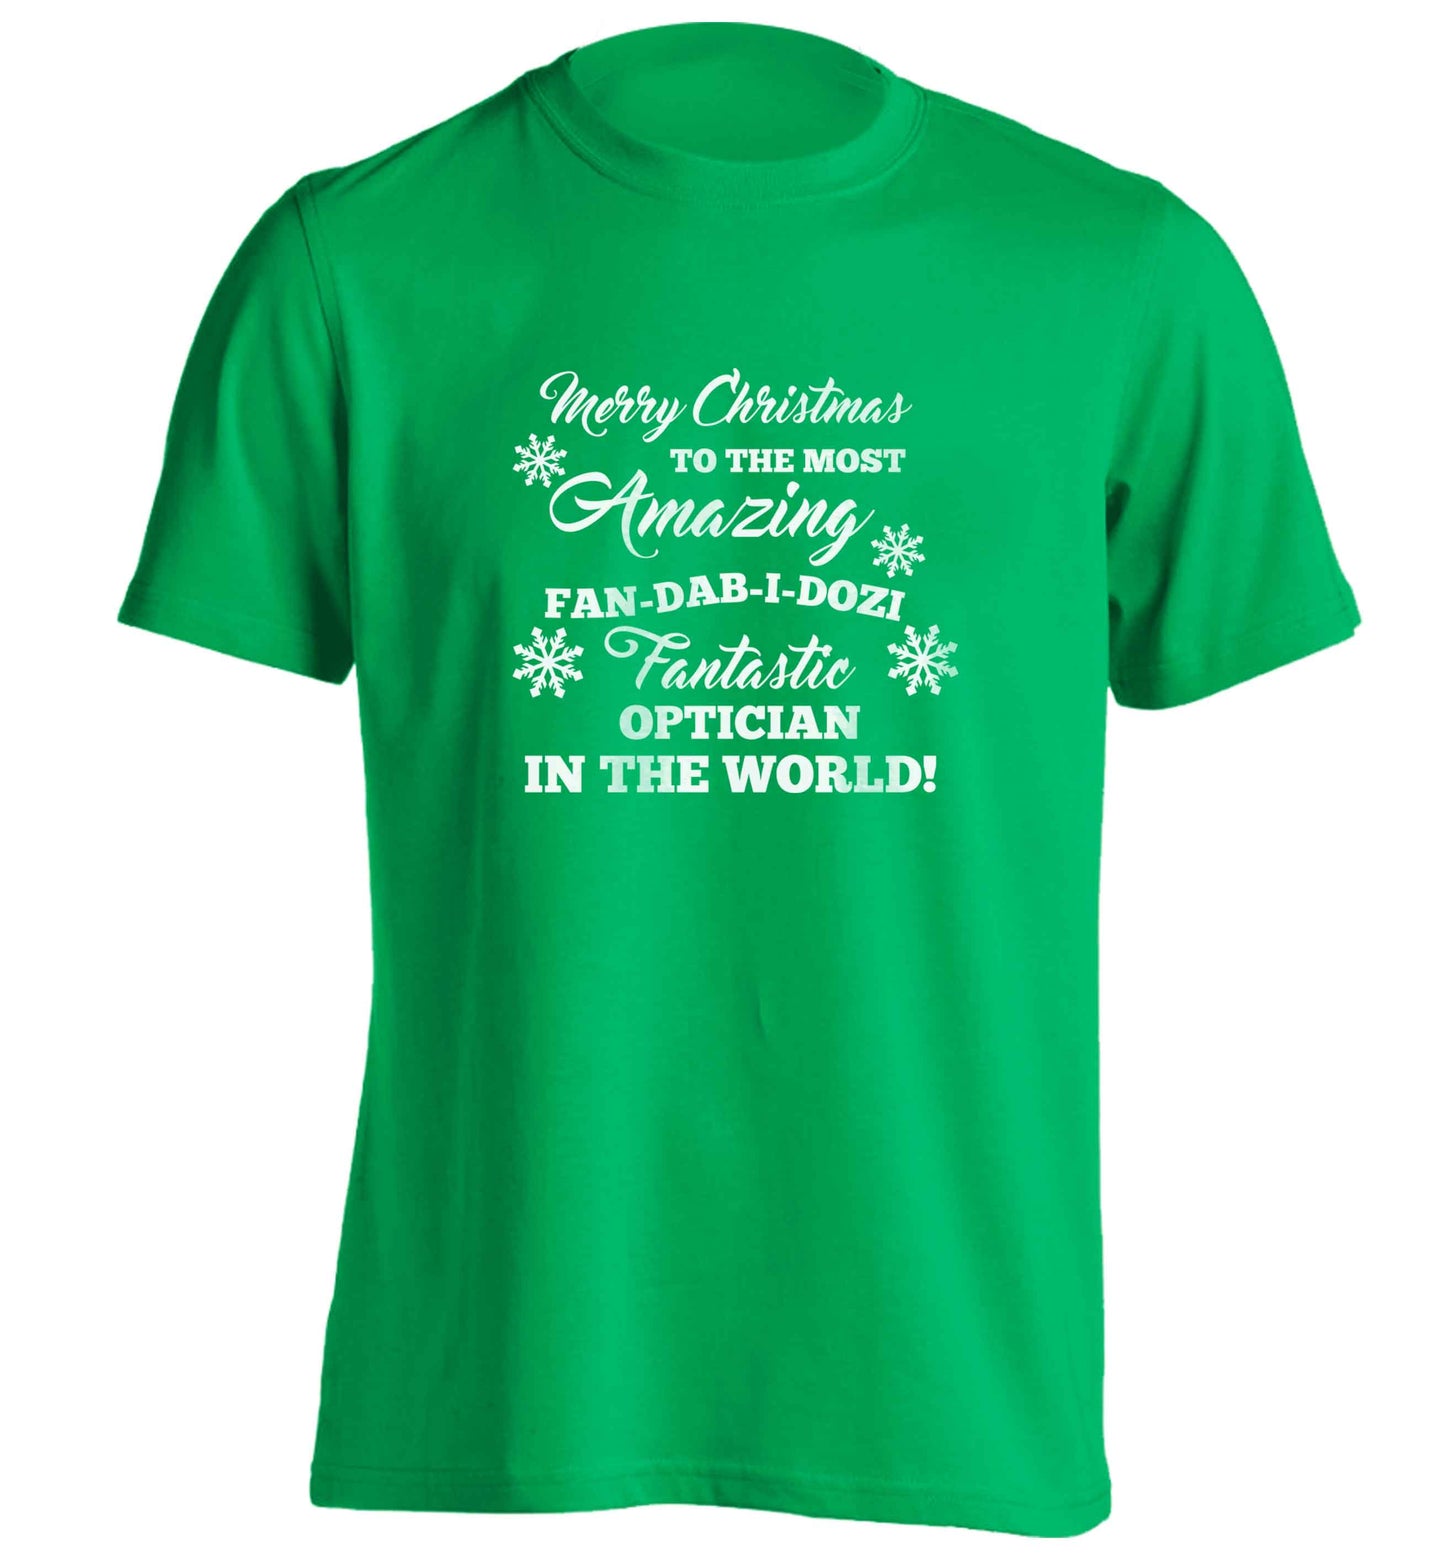 Merry Christmas to the most amazing optician in the world! adults unisex green Tshirt 2XL